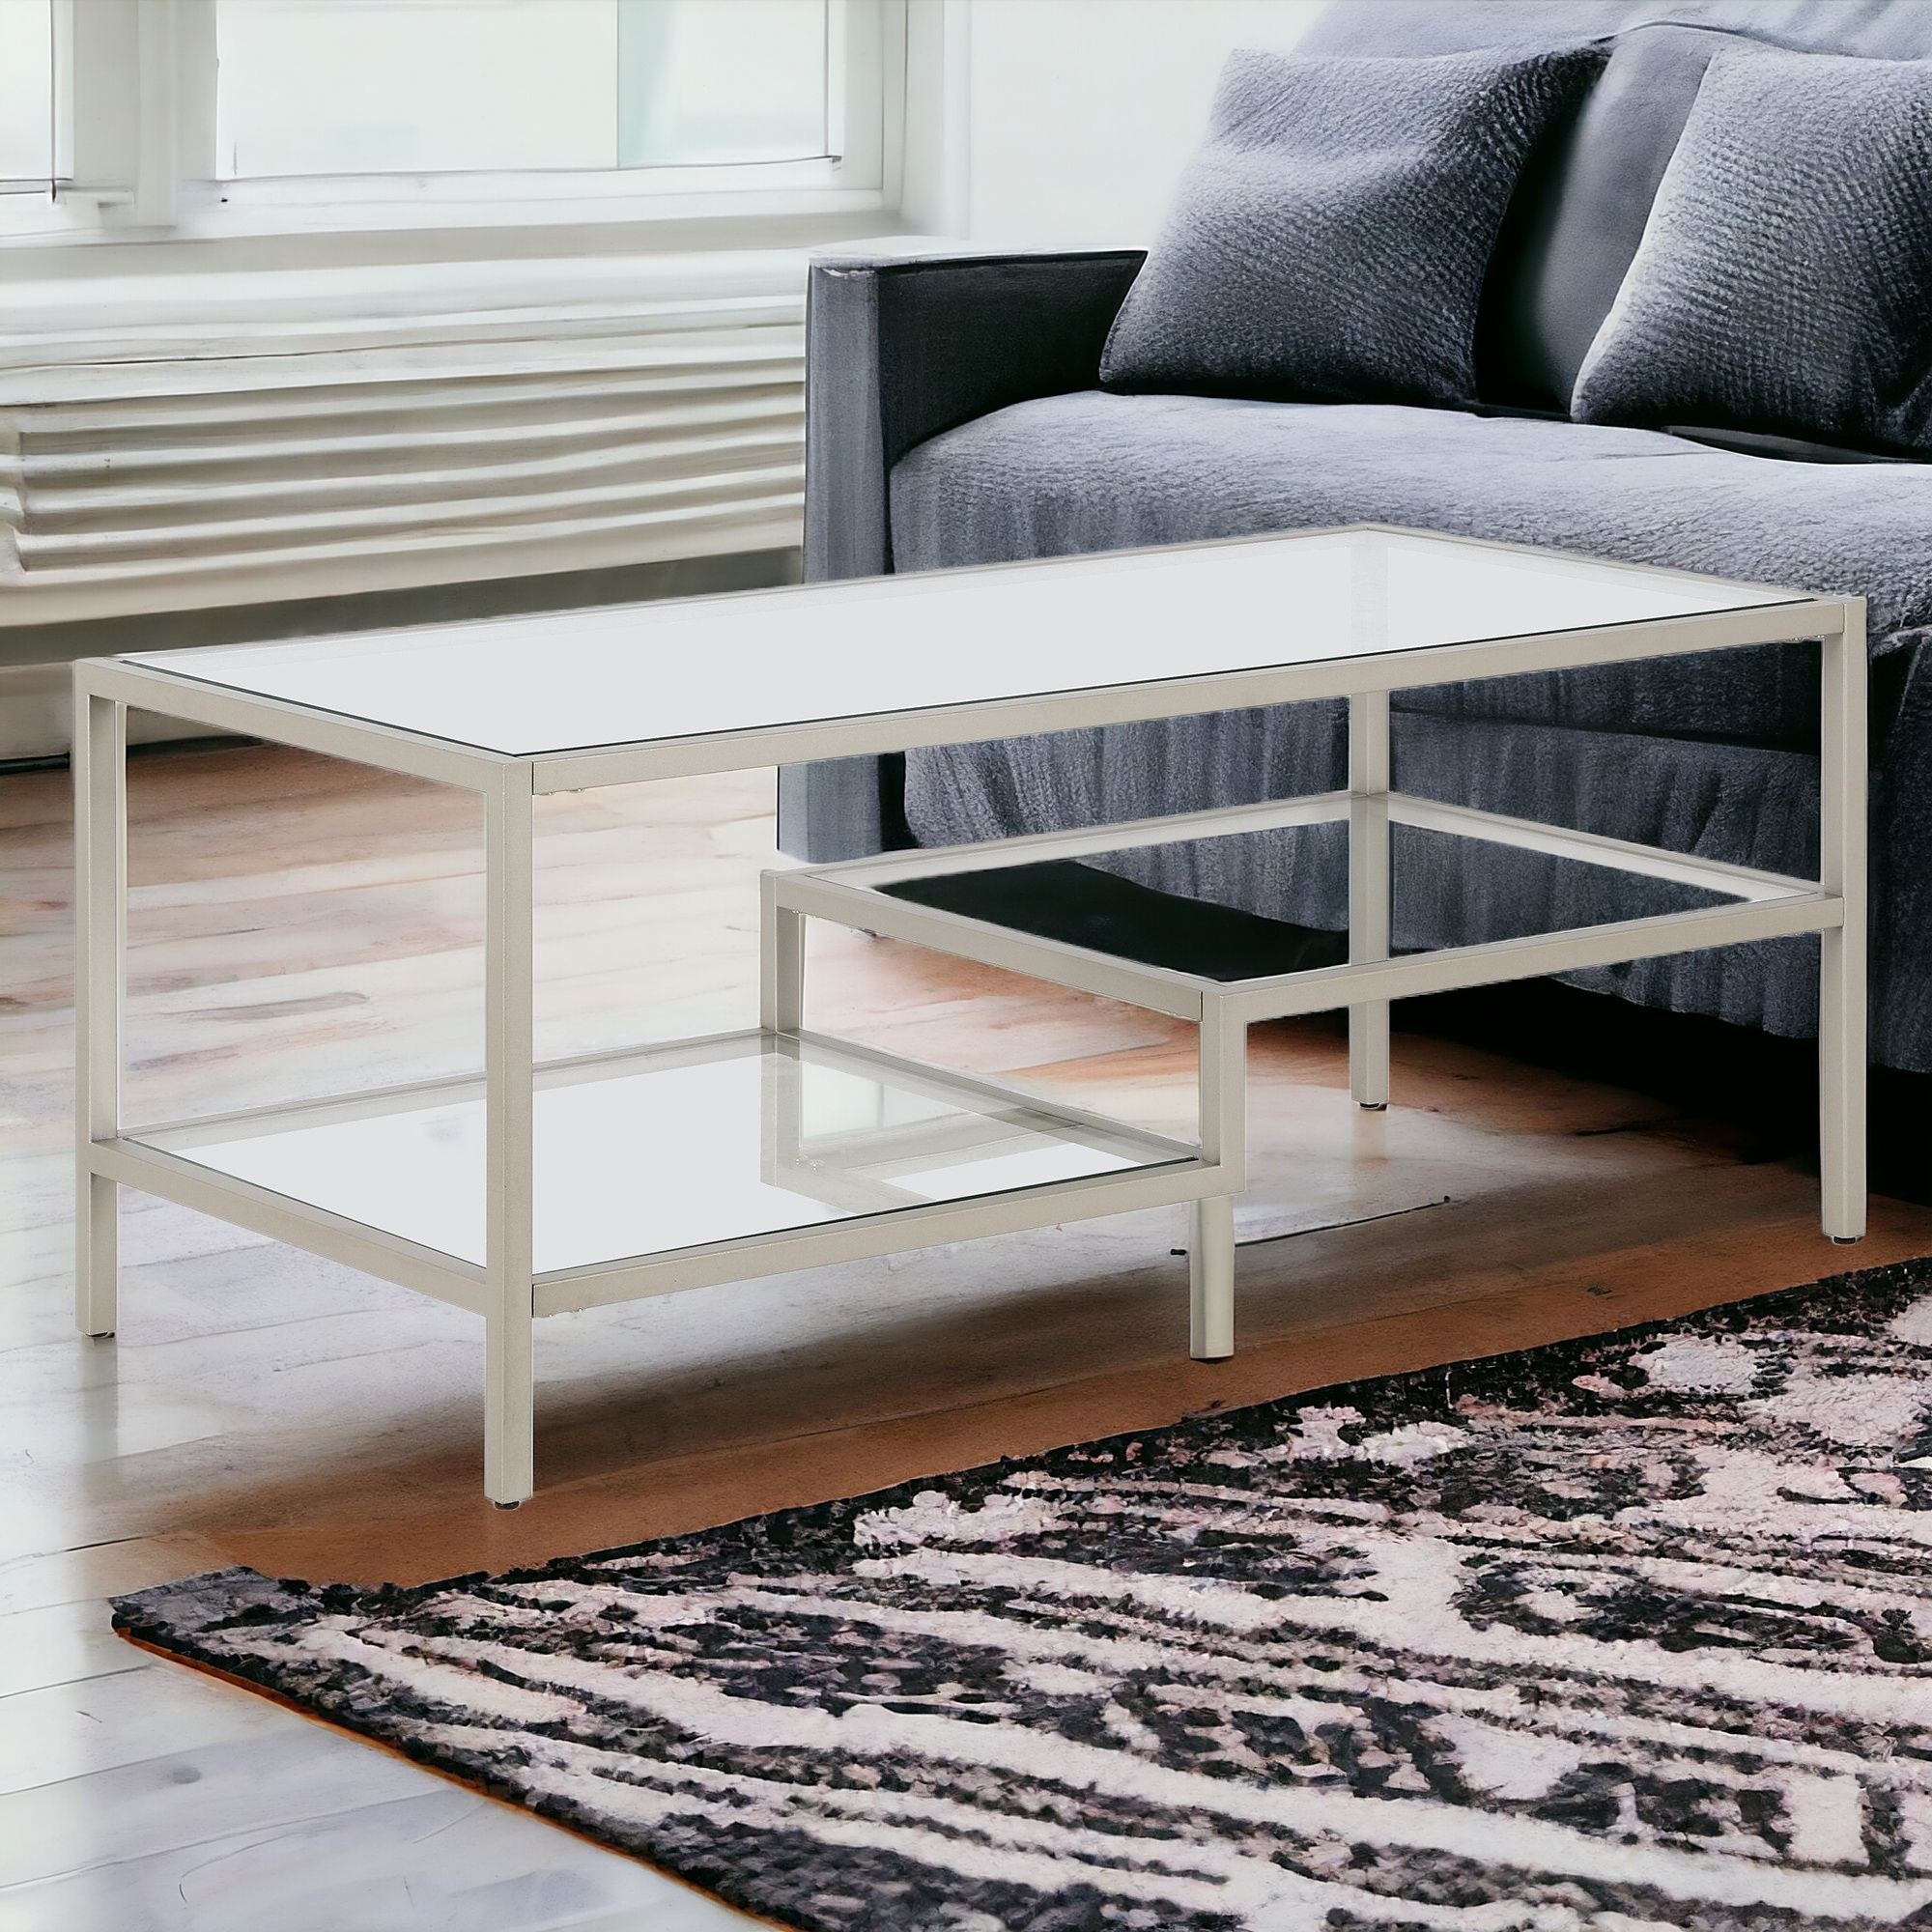 45" Silver Glass And Steel Coffee Table With Two Shelves